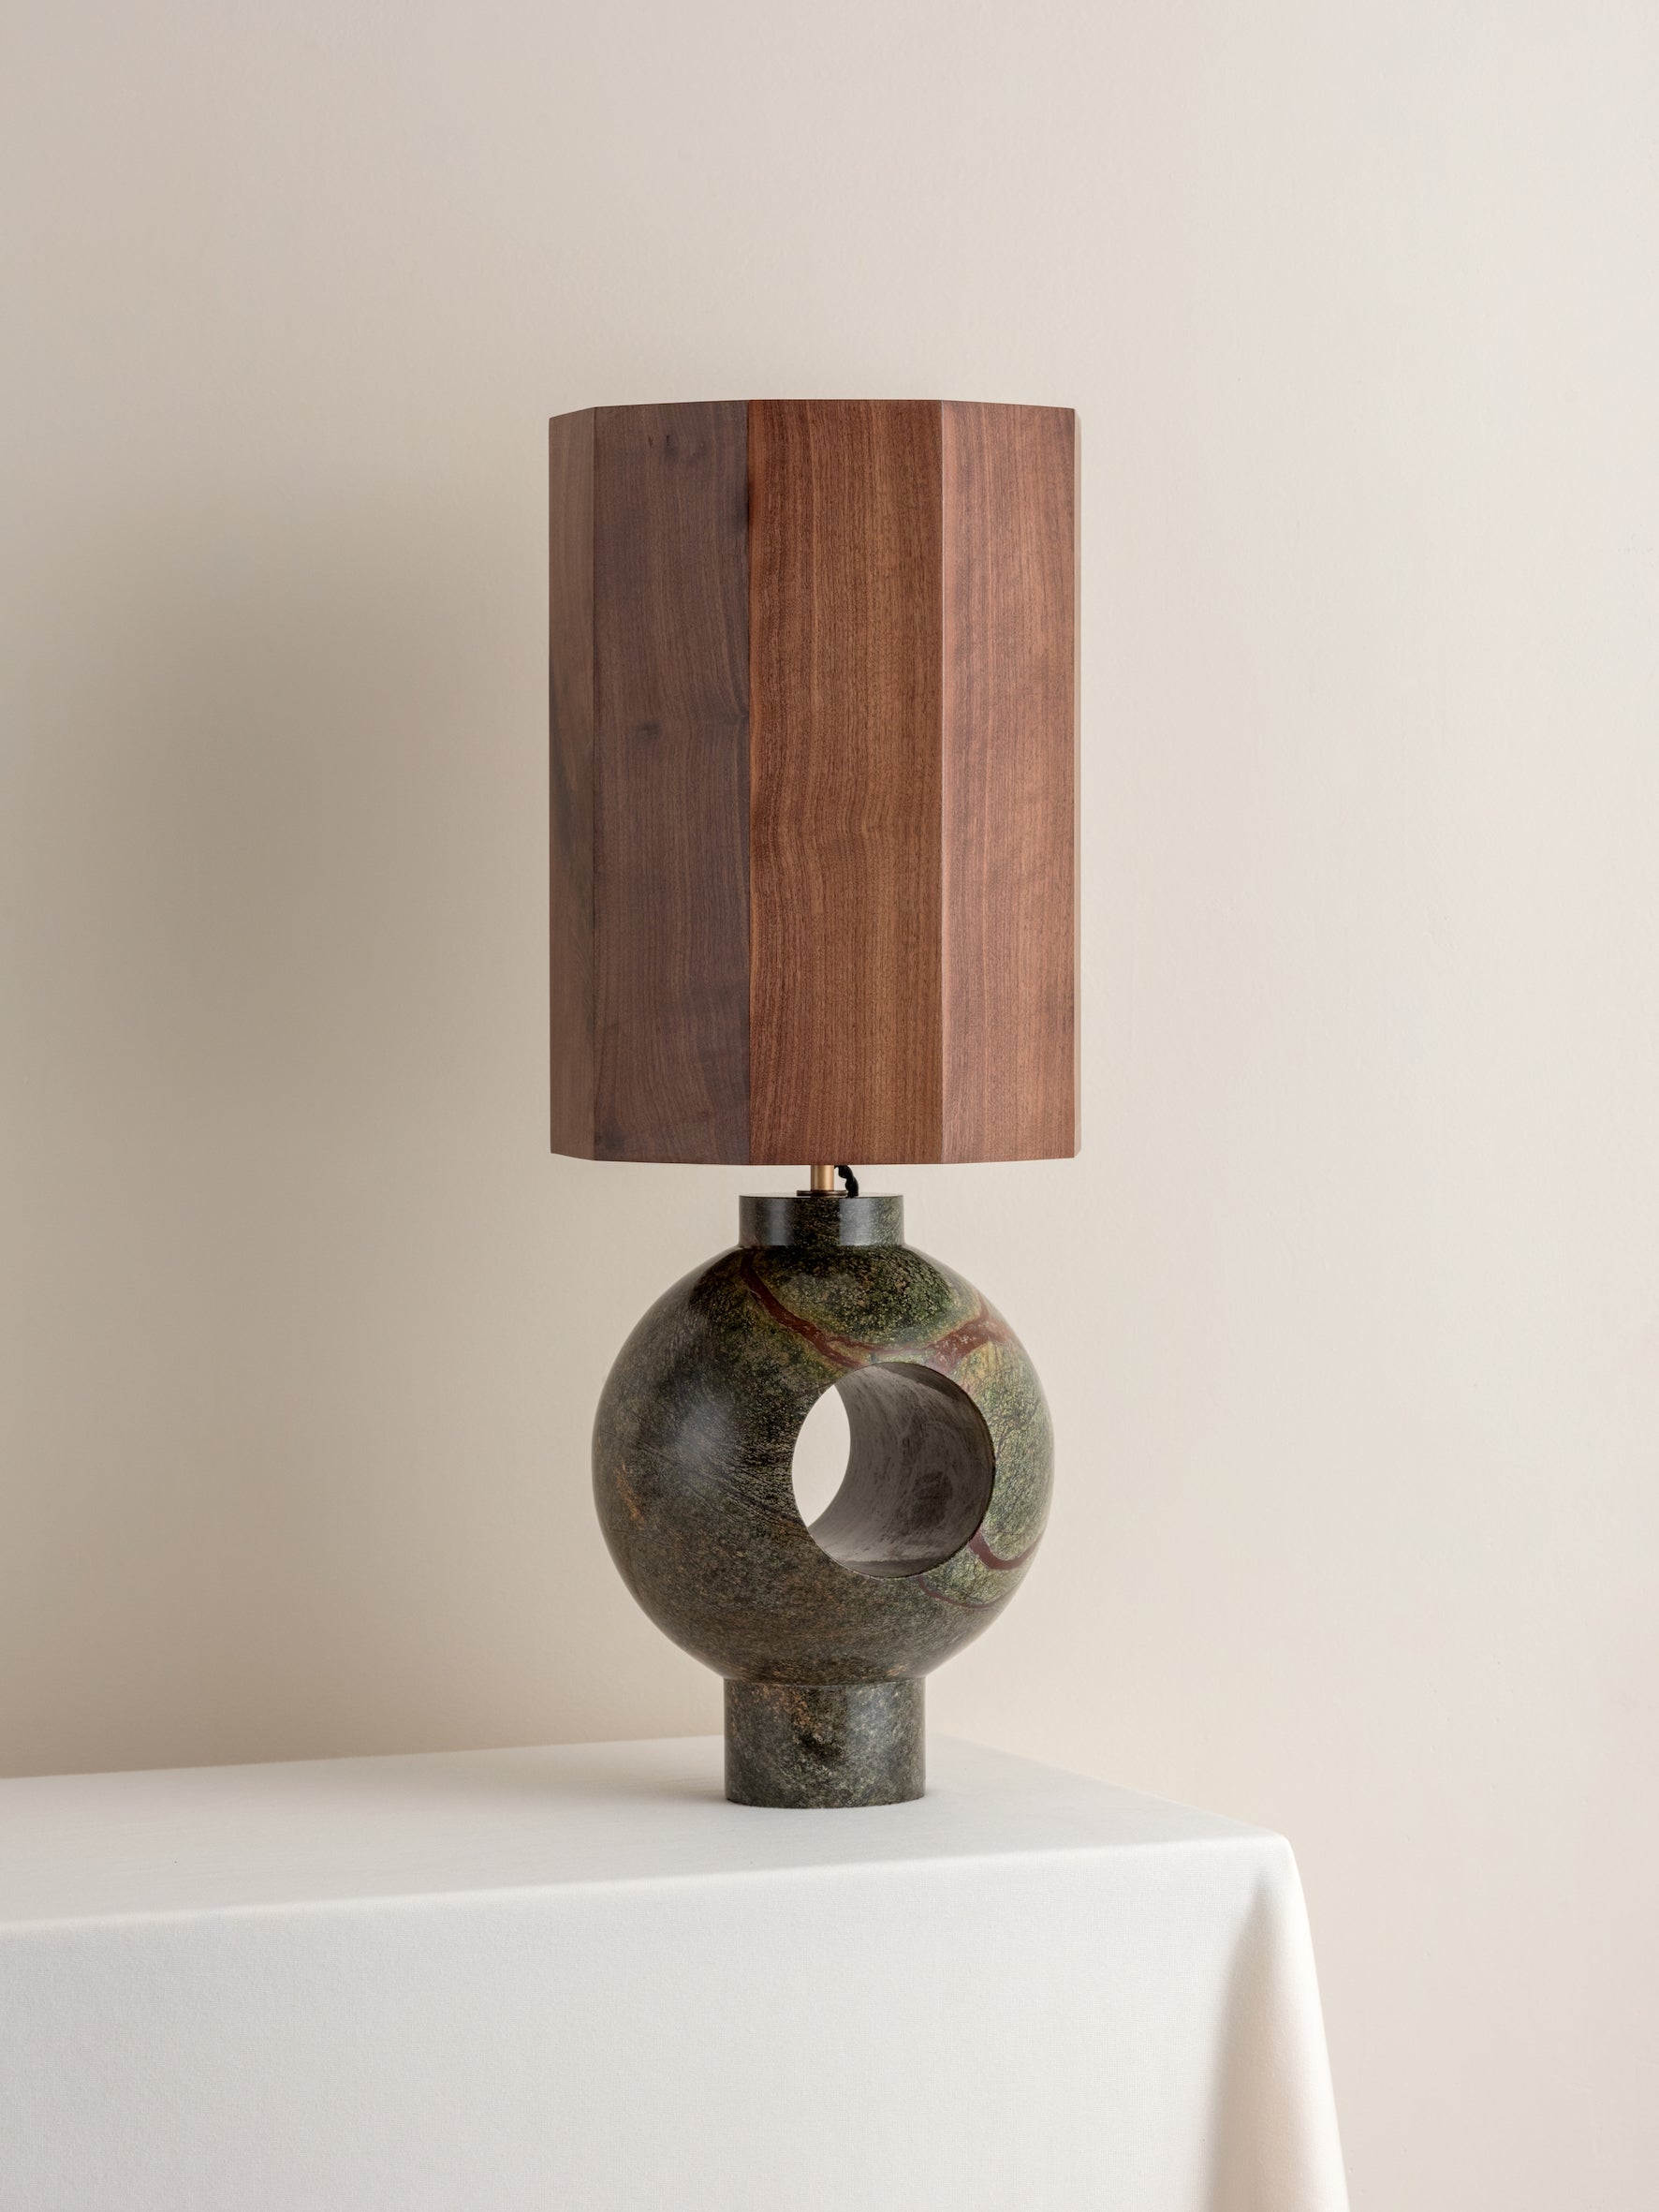 Editions marble lamp with + walnut wood shade | Table Lamp | Lights & Lamps Inc | Modern Affordable Designer Lighting | USA